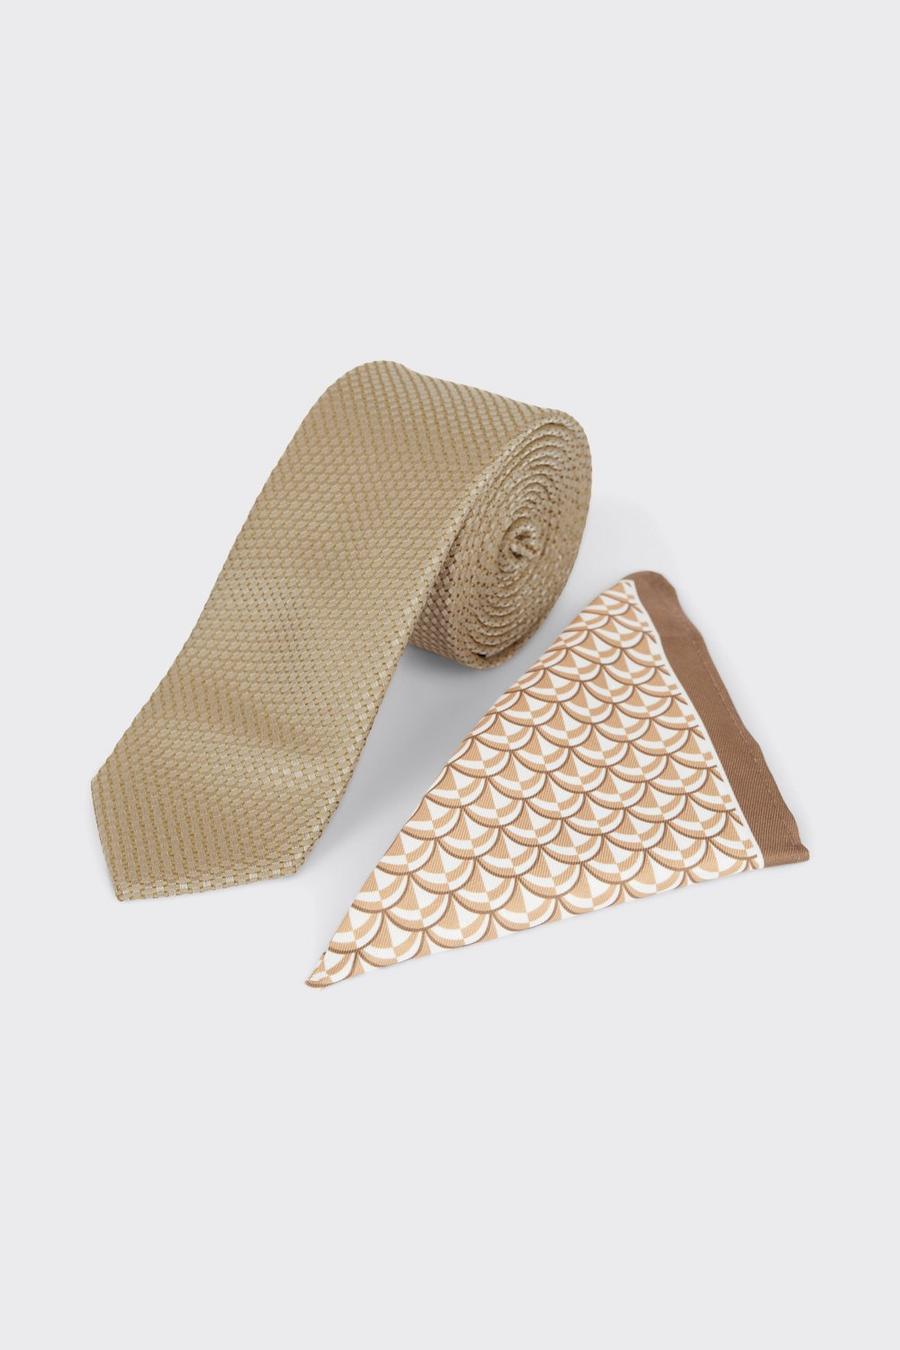 Champagne Textured Tie And Geo Pocket Square Set